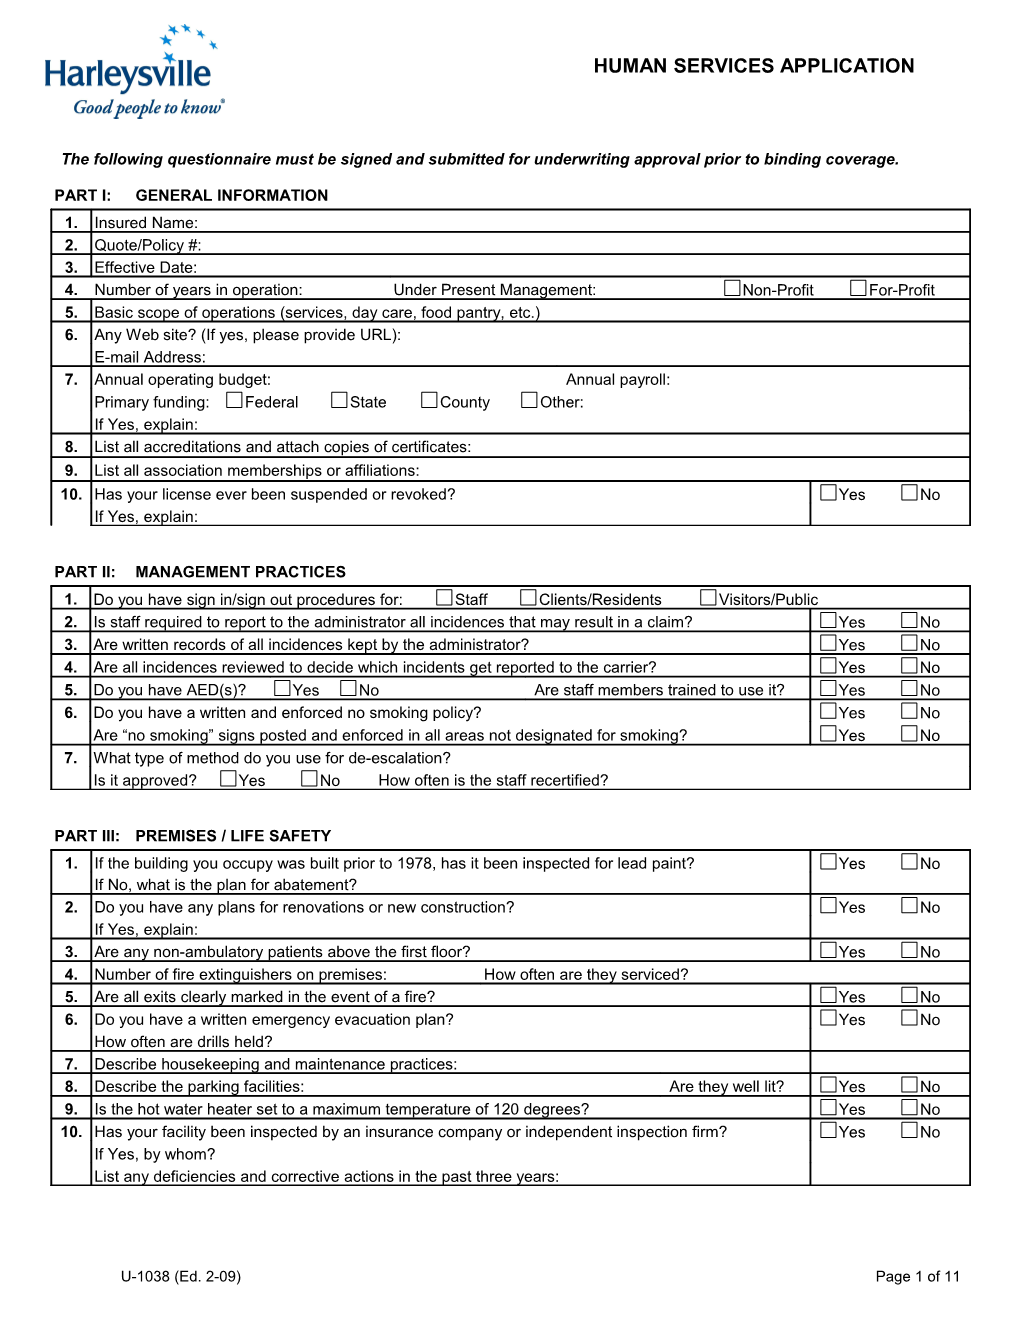 Human Services Application